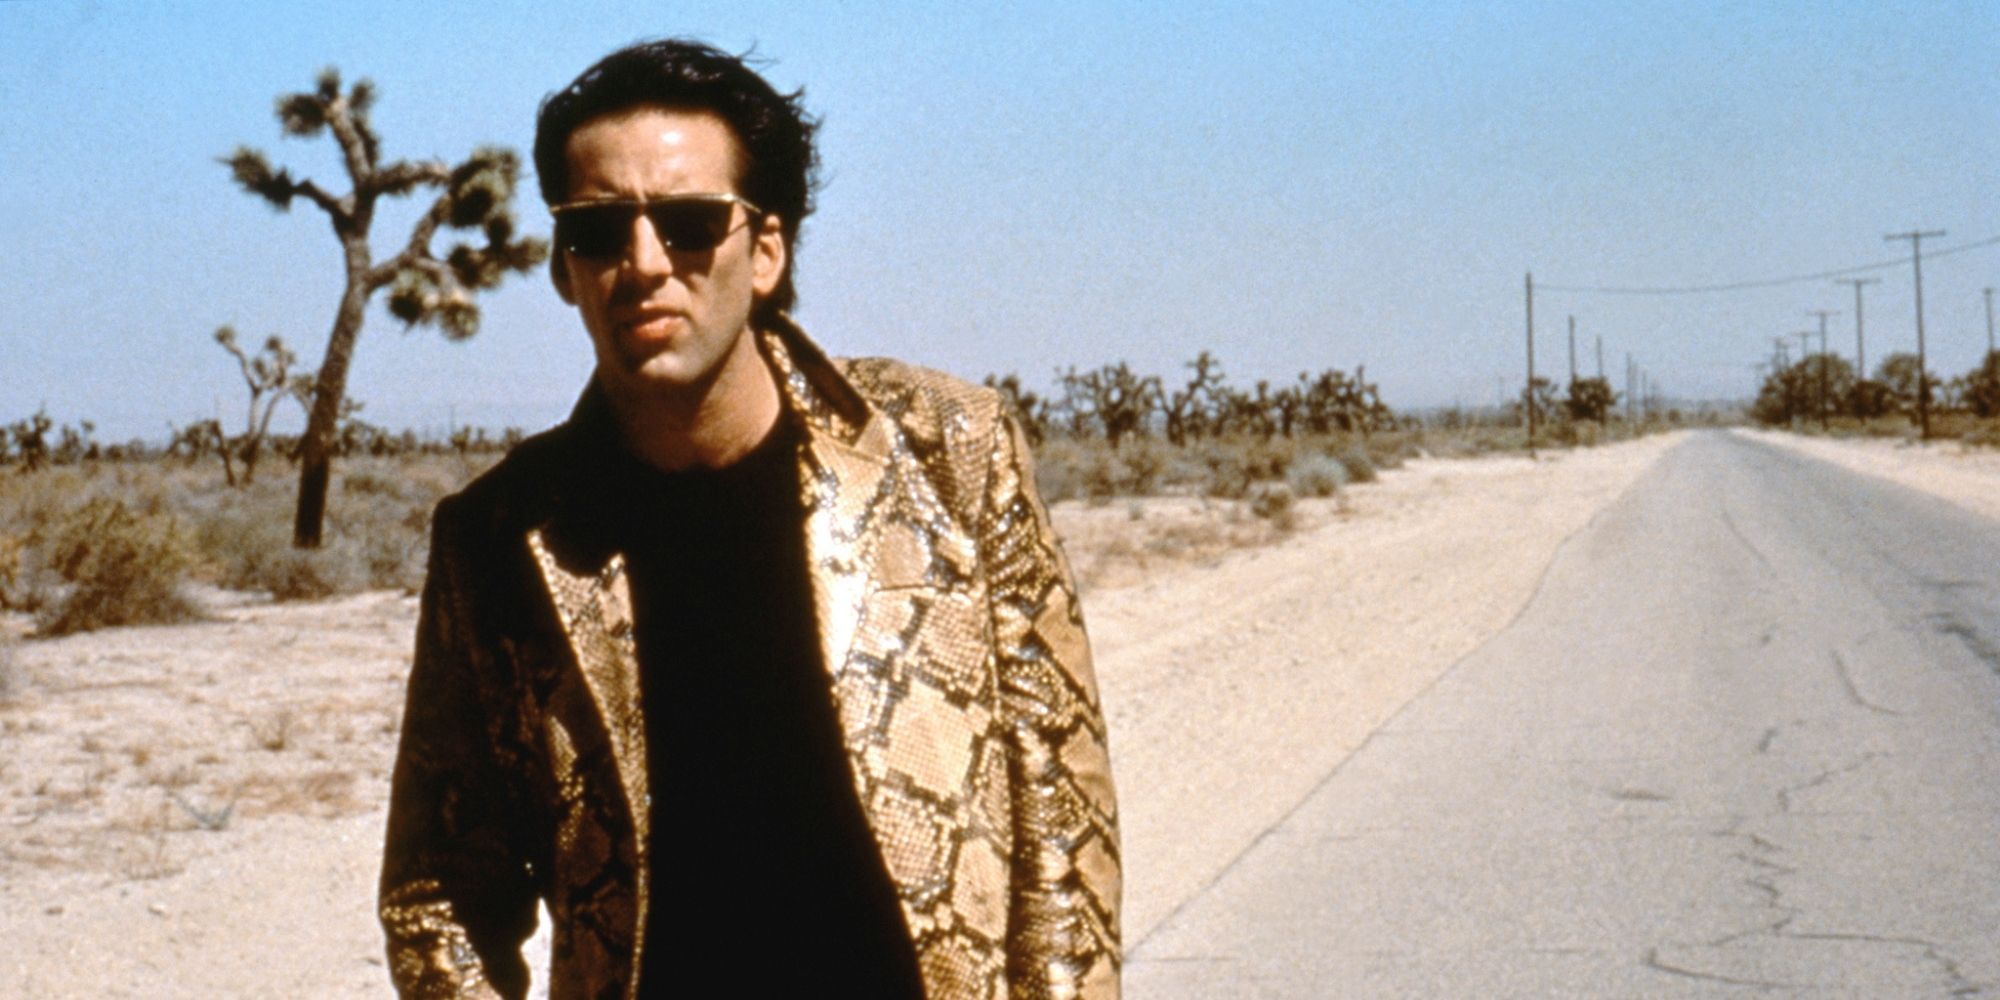 Nicolas Cage in a snakeskin jacket in Wild at Heart